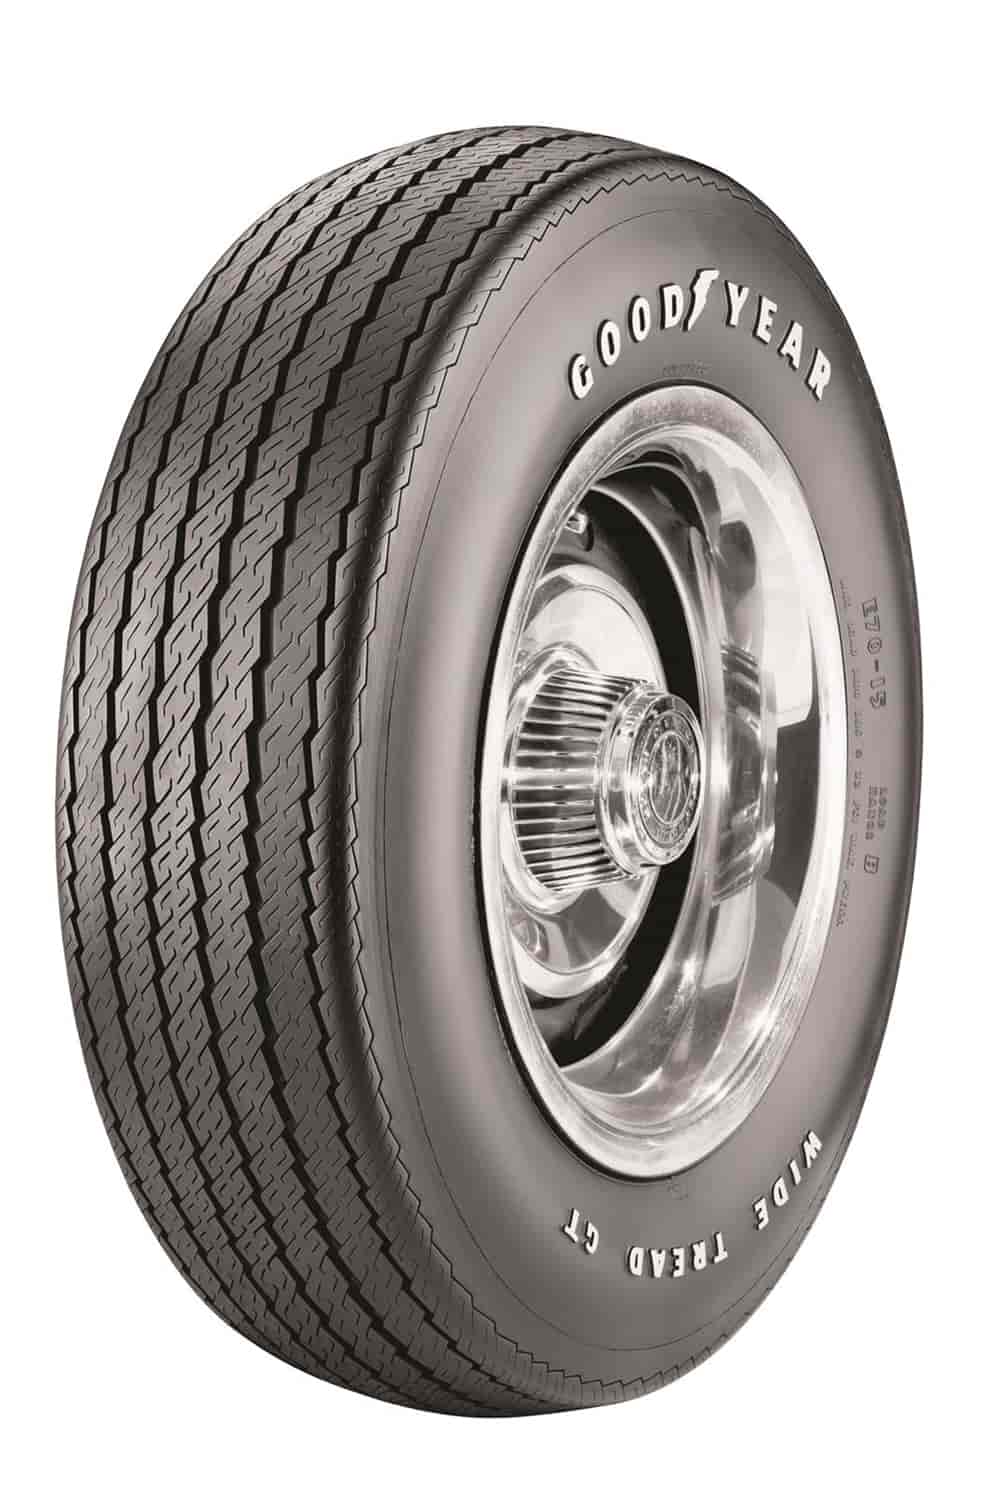 Goodyear Collector Series Speedway Wide Tread Tire